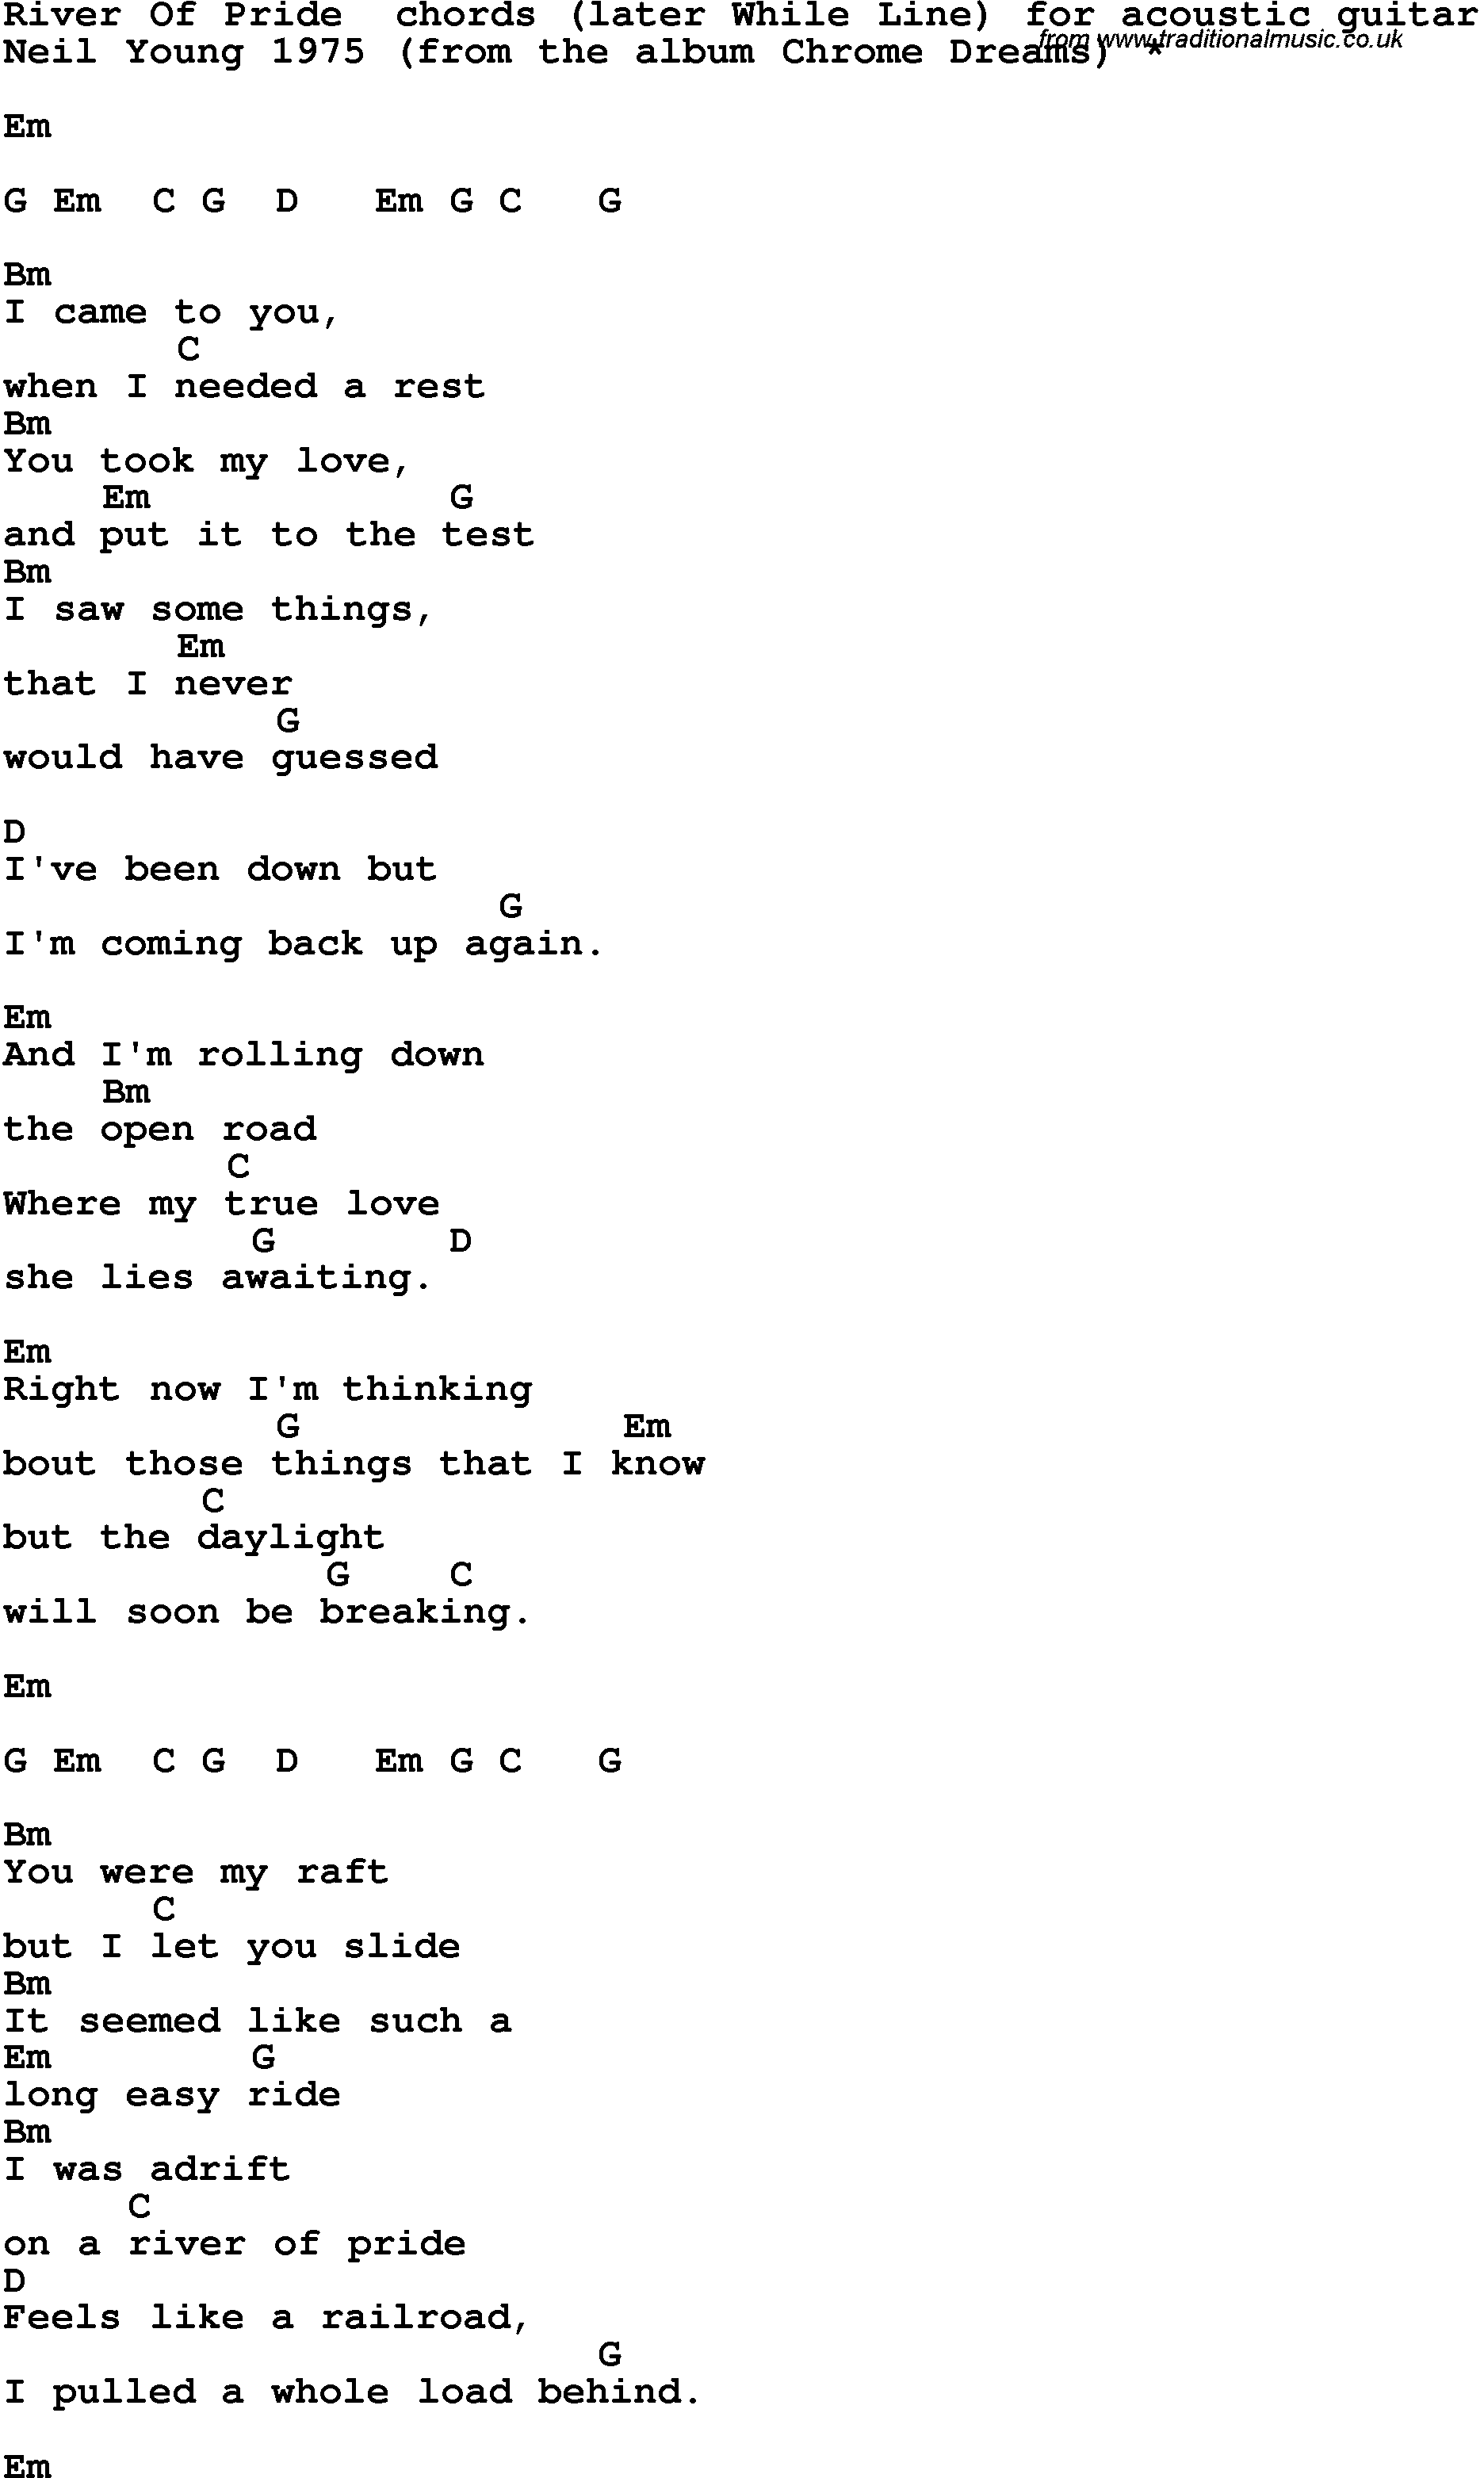 Song Lyrics with guitar chords for River Of Pride